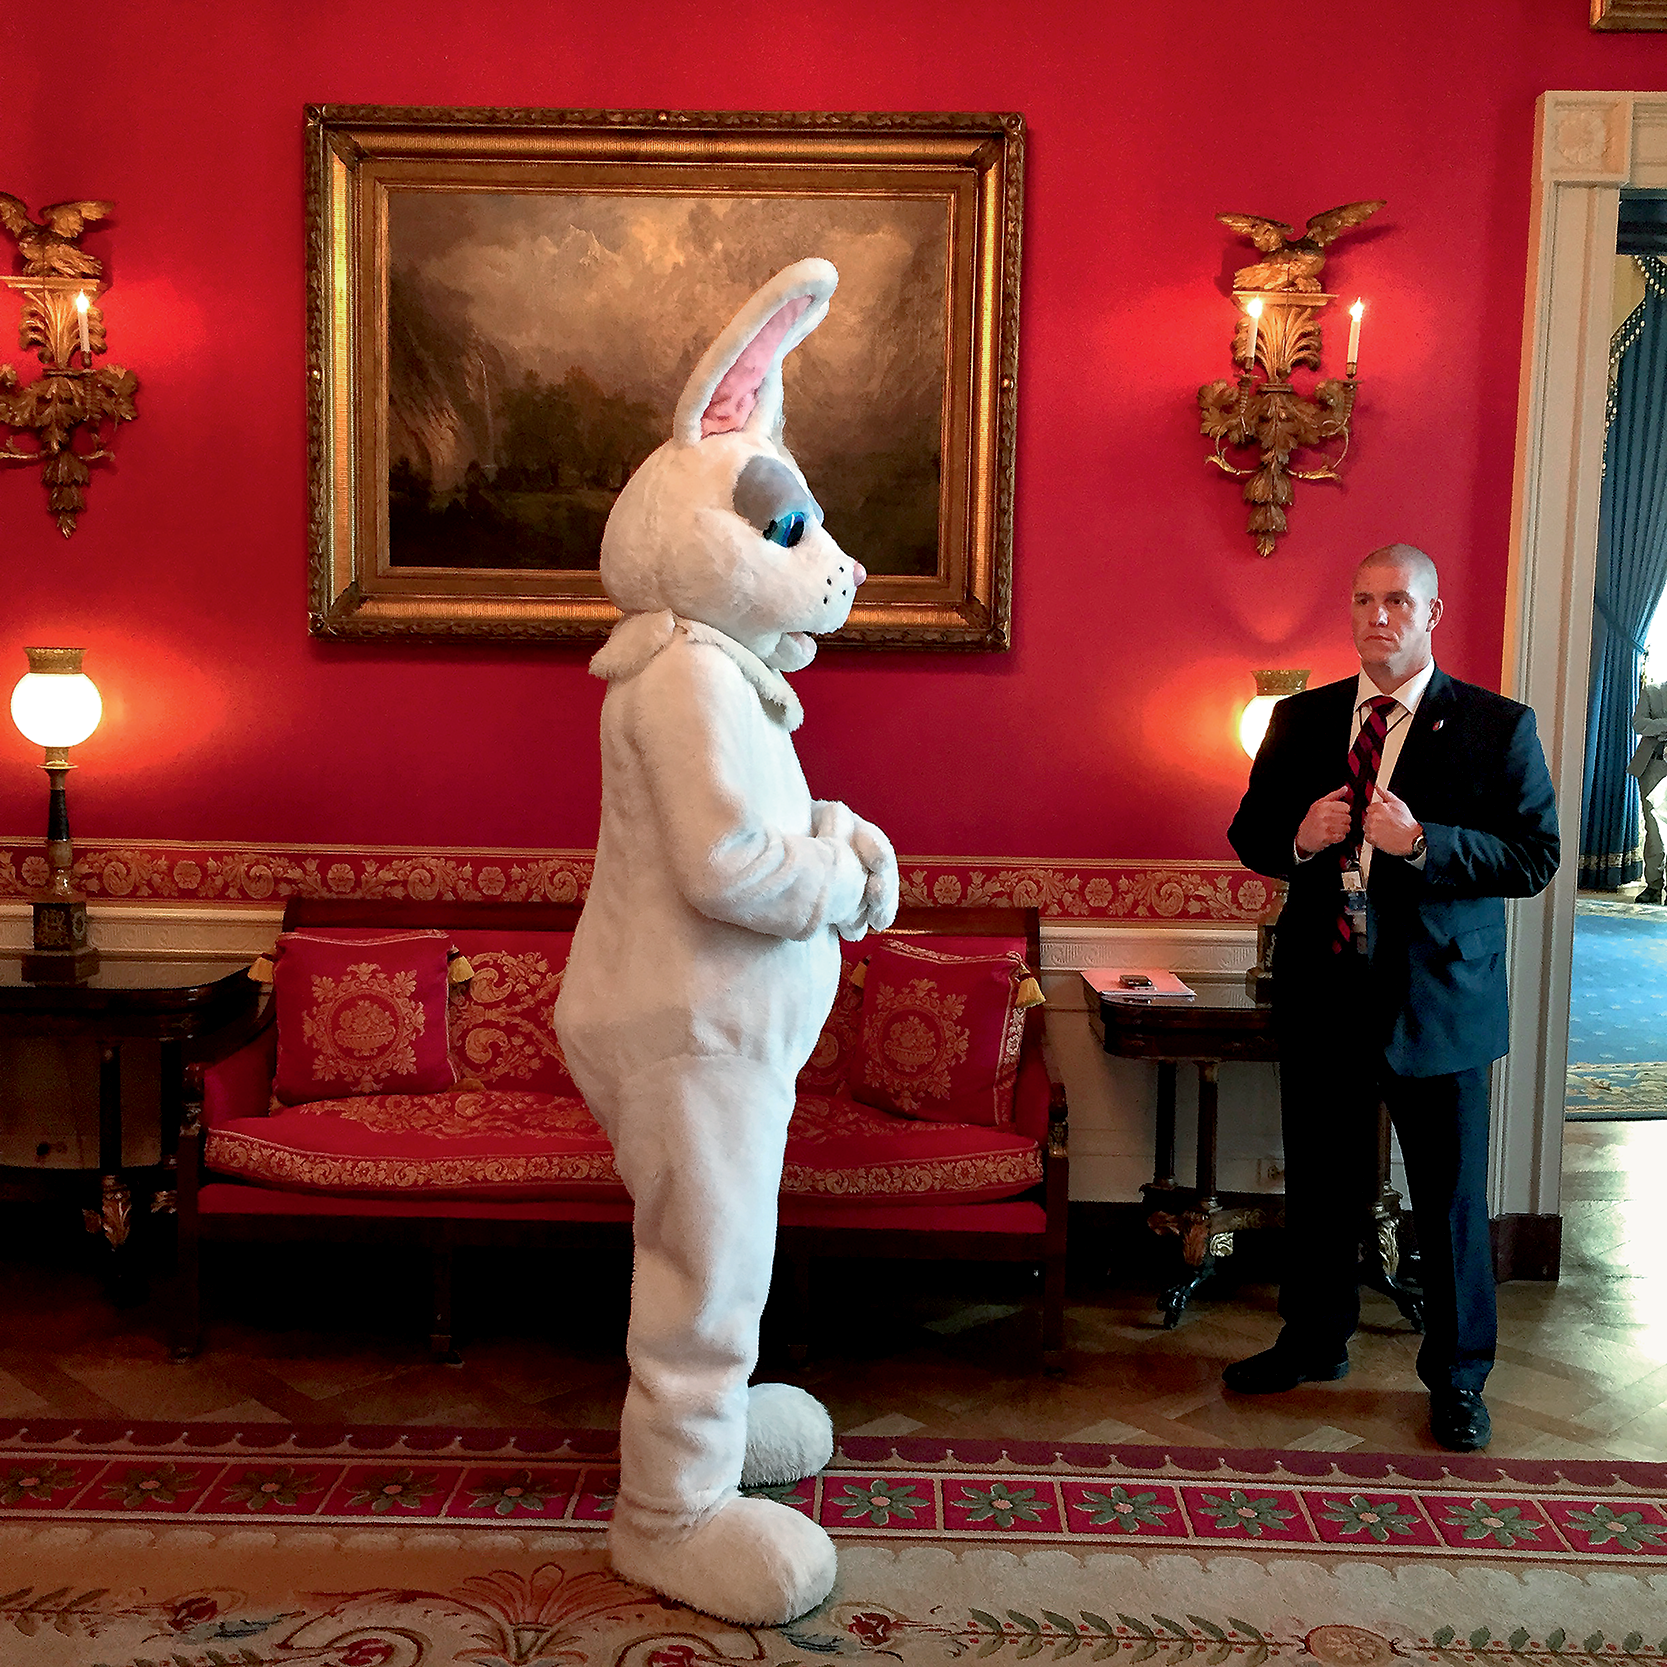 The Easter Bunny waits in the Red Room to enter the adjacent Blue Room to meet the President as a Secret Service agent stands guard before the annual Easter Egg Roll in 2015. Copyright © 2022 by Pete Souza. (Courtesy of Pete Souza)